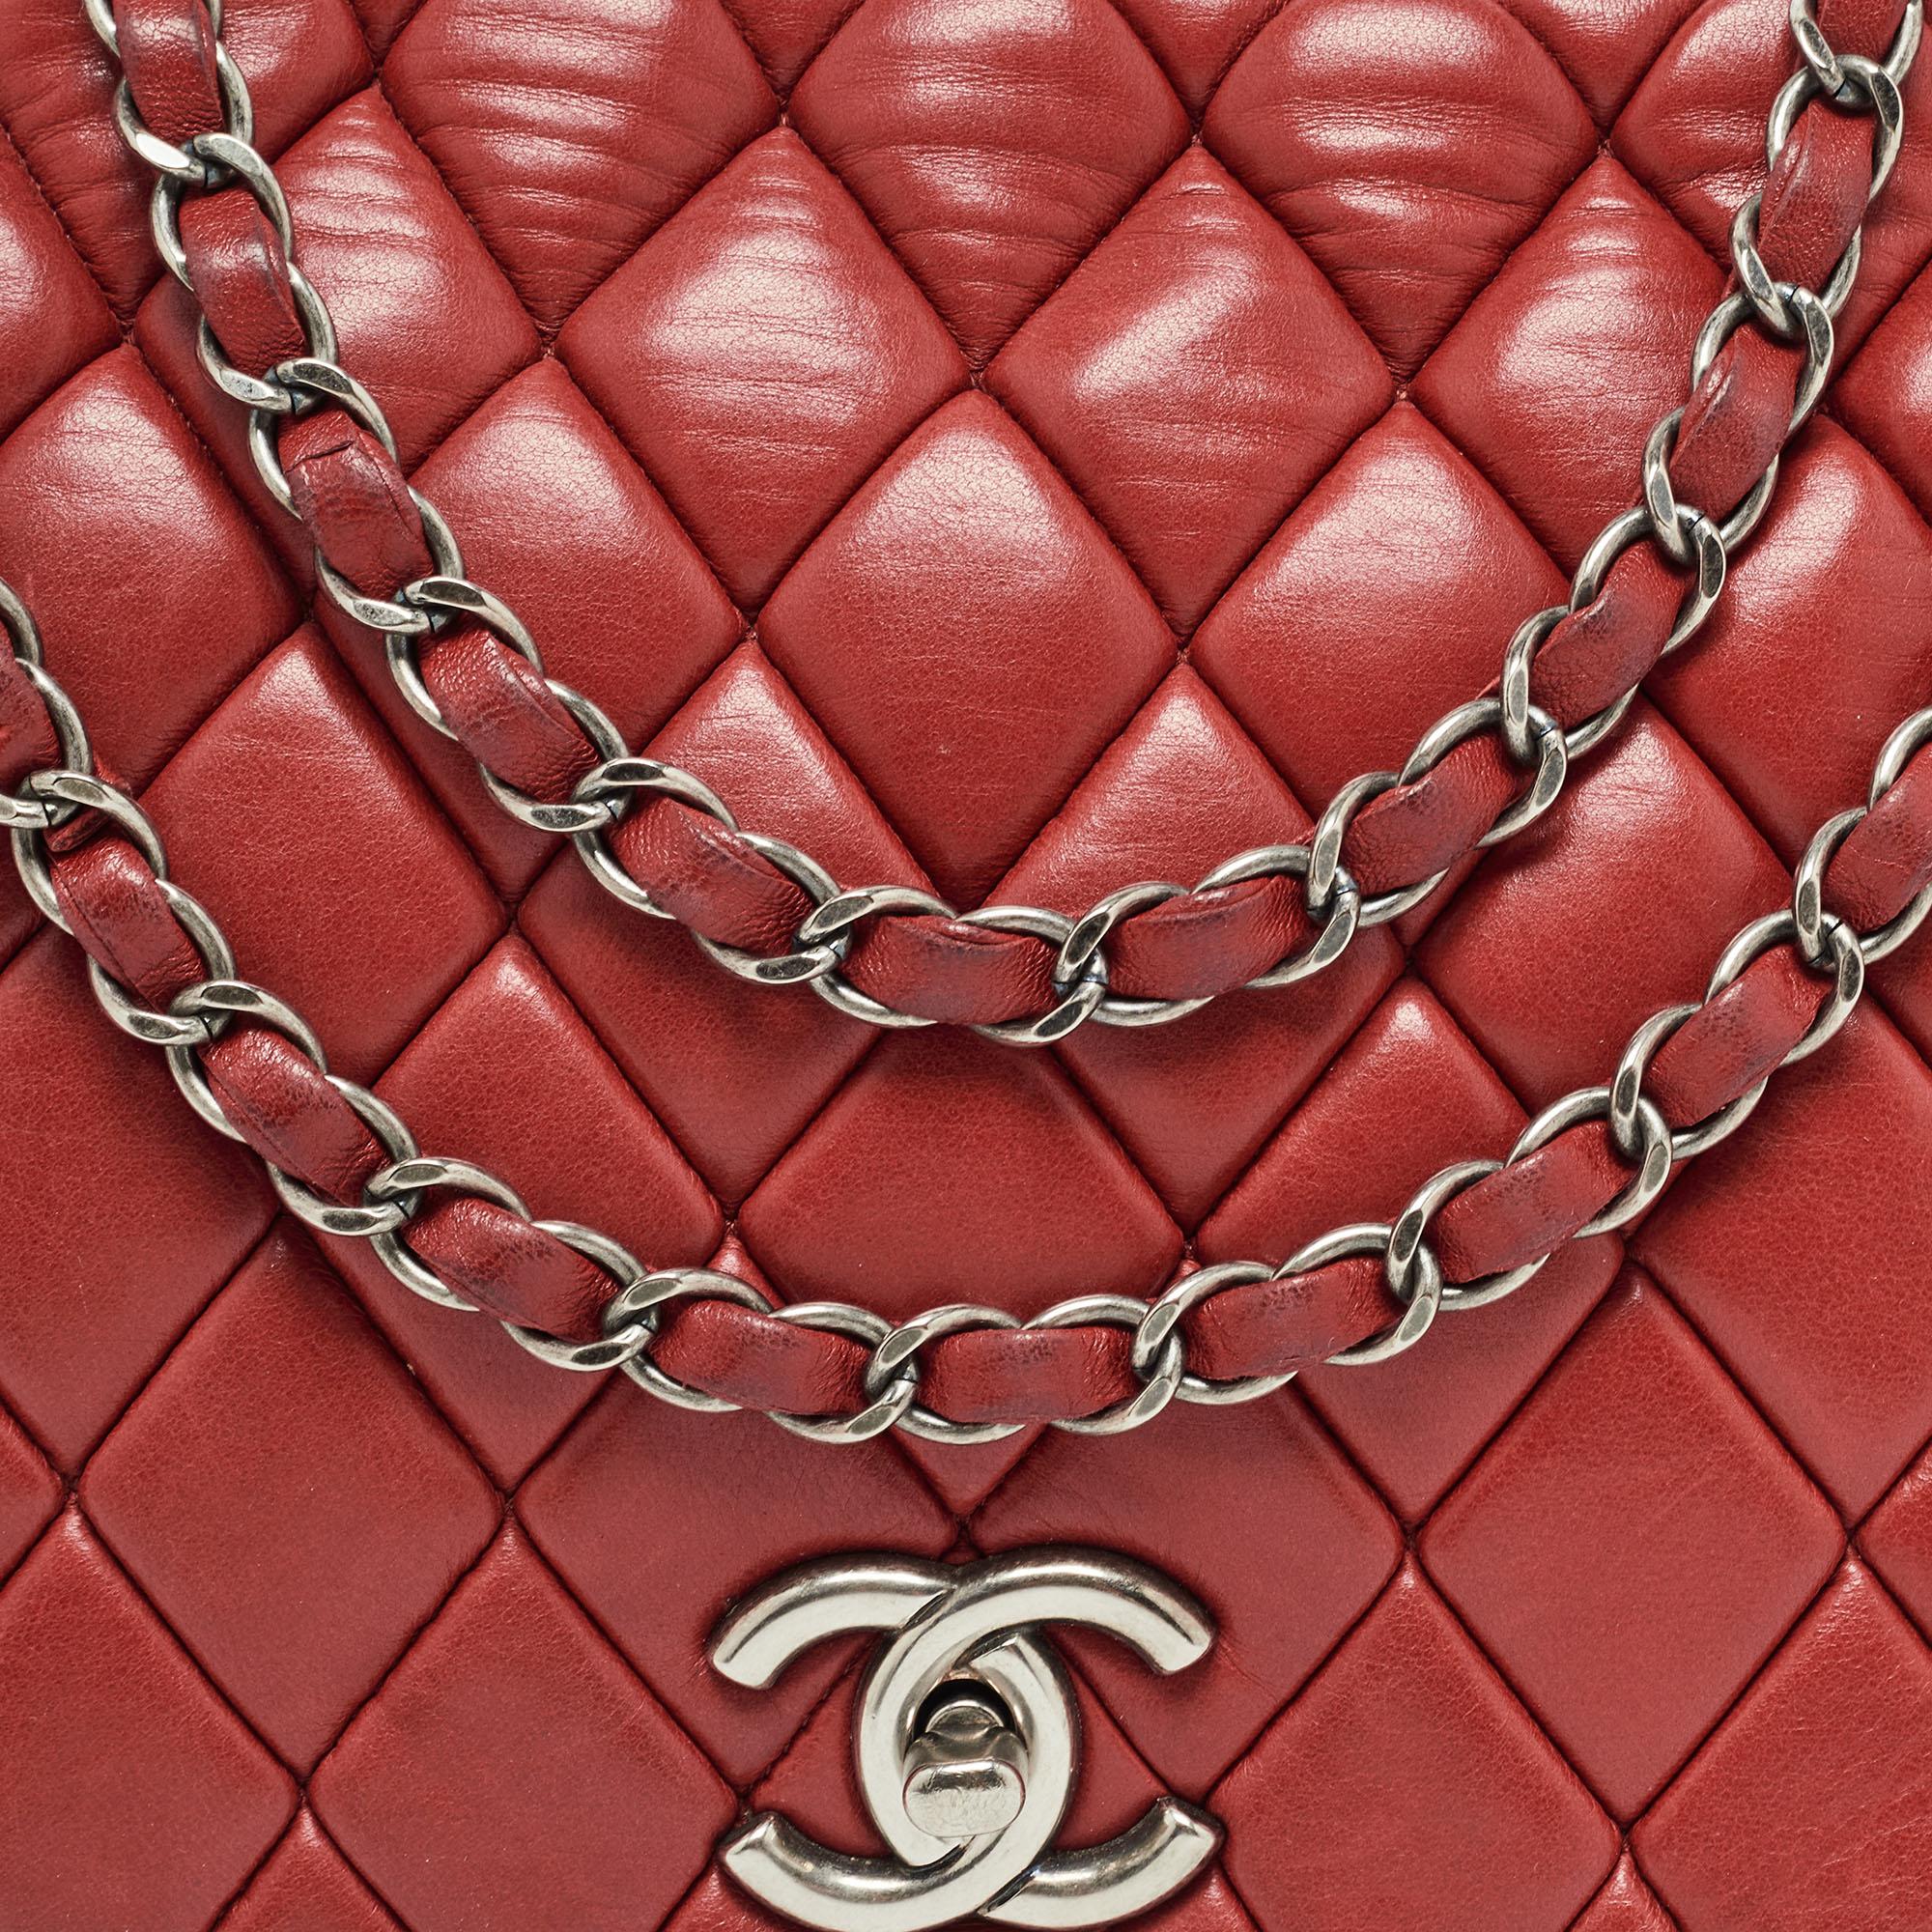 Chanel Red Bubble Quilted Leather Flap Shoulder Bag 8